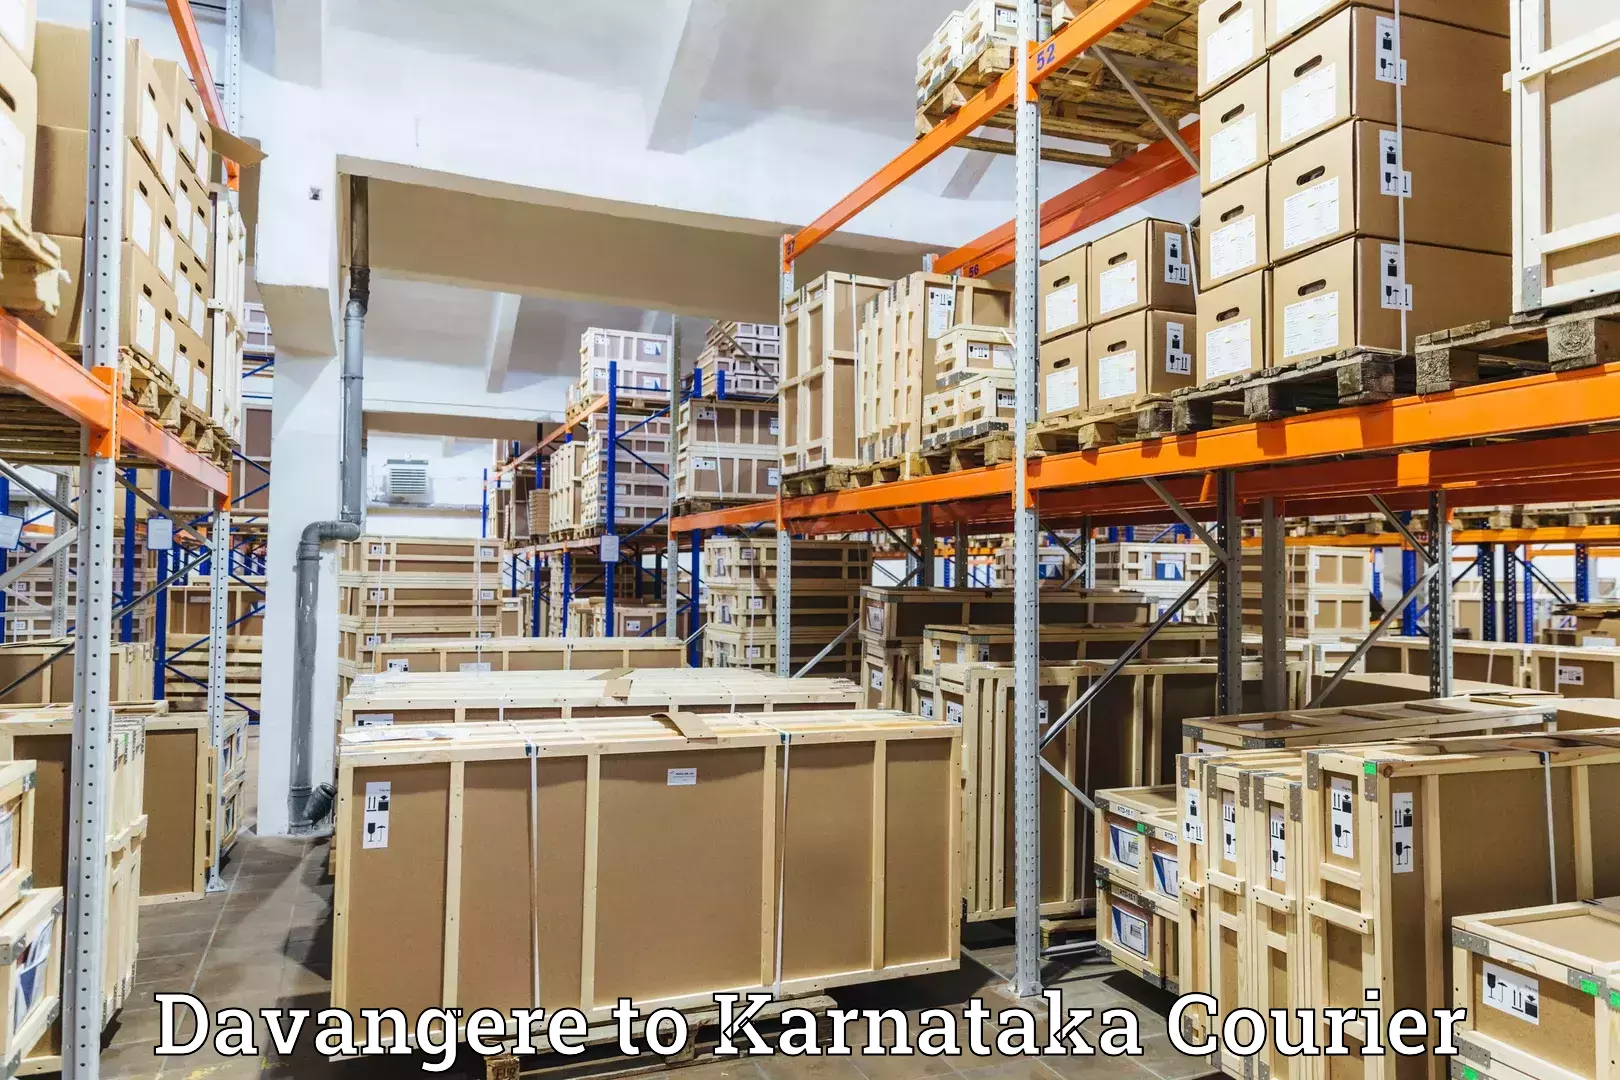 Residential courier service Davangere to Hunsur